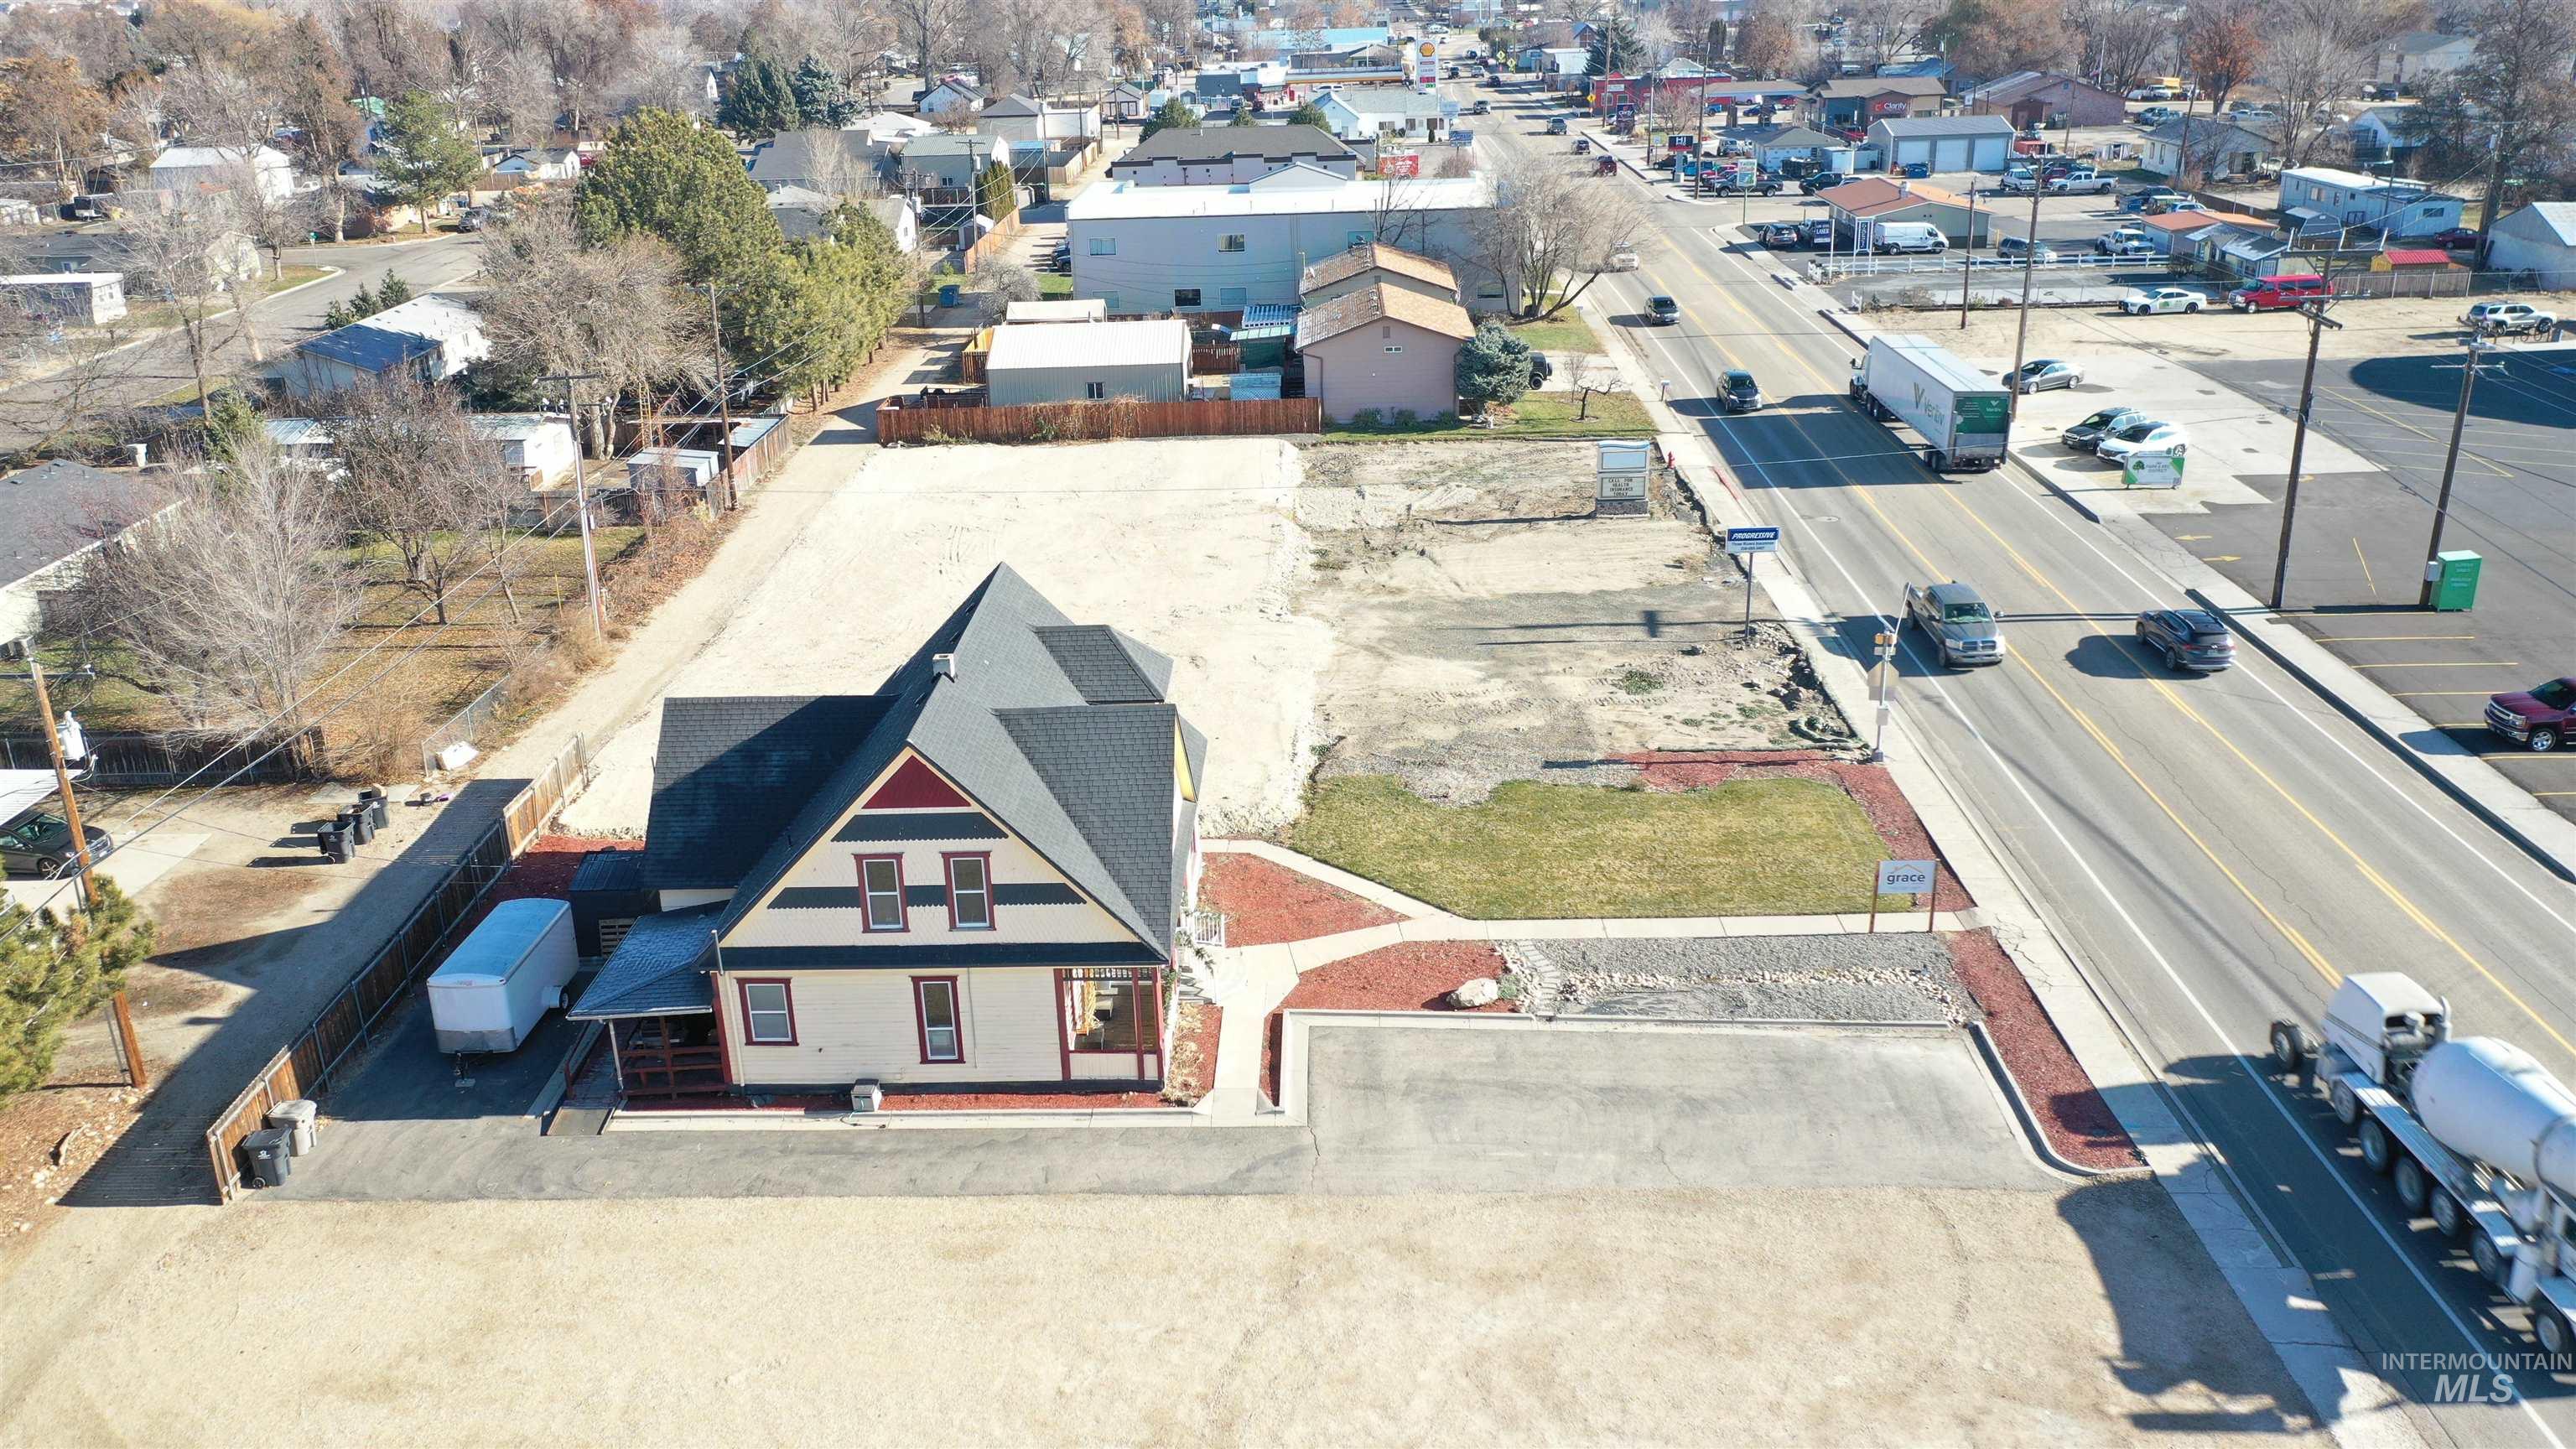 120 & 208 W Main Steet, Middleton, Idaho 83644, Business/Commercial For Sale, Price $995,000,MLS 98907169